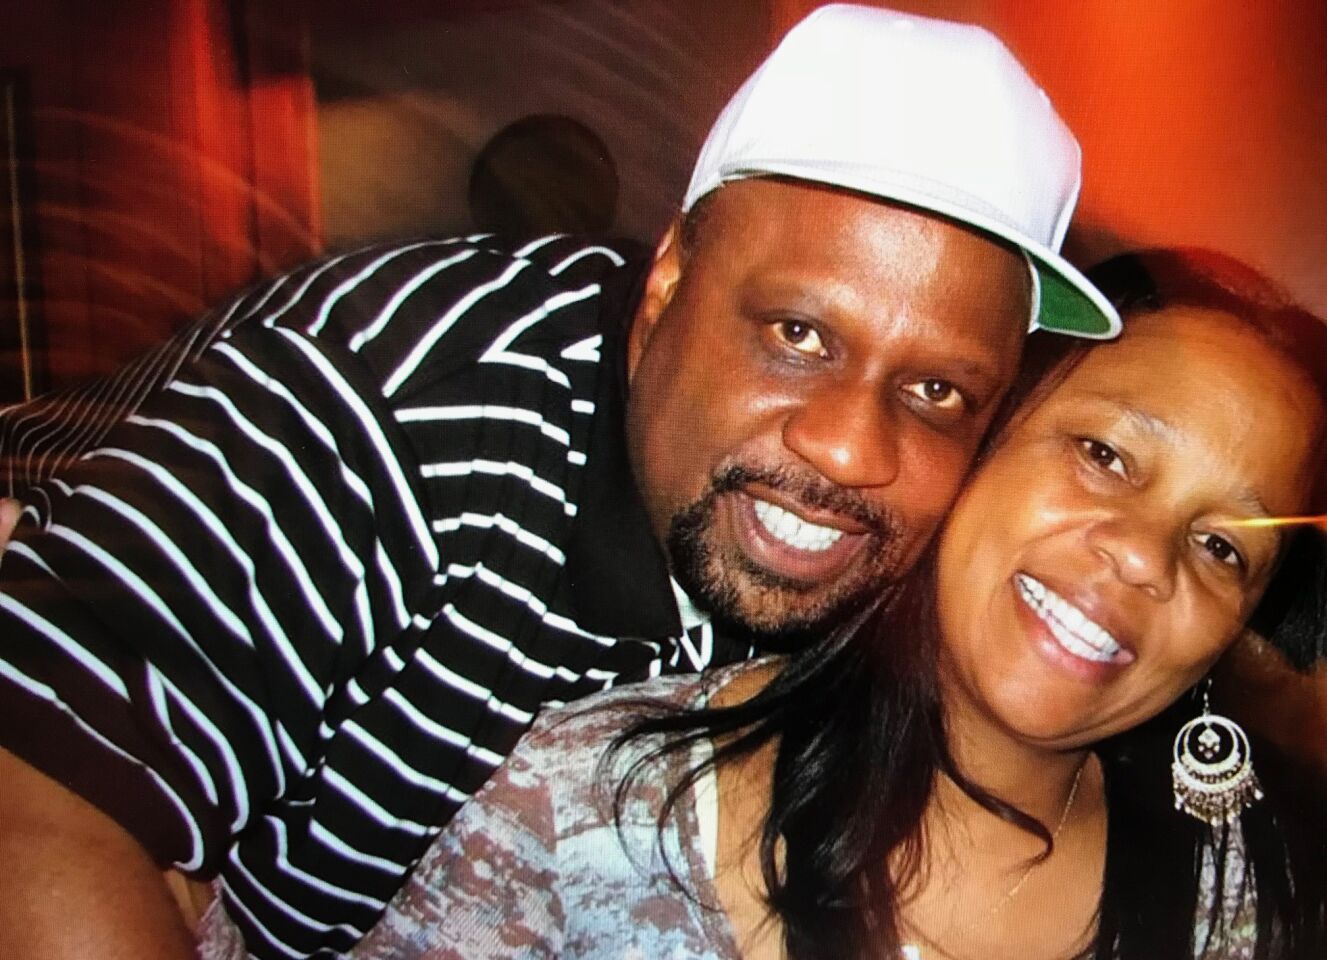 A family photo of Terry Carter and his wife Lillian Carter. Terry Carter was killed by Marion "Suge" Knight in 2015